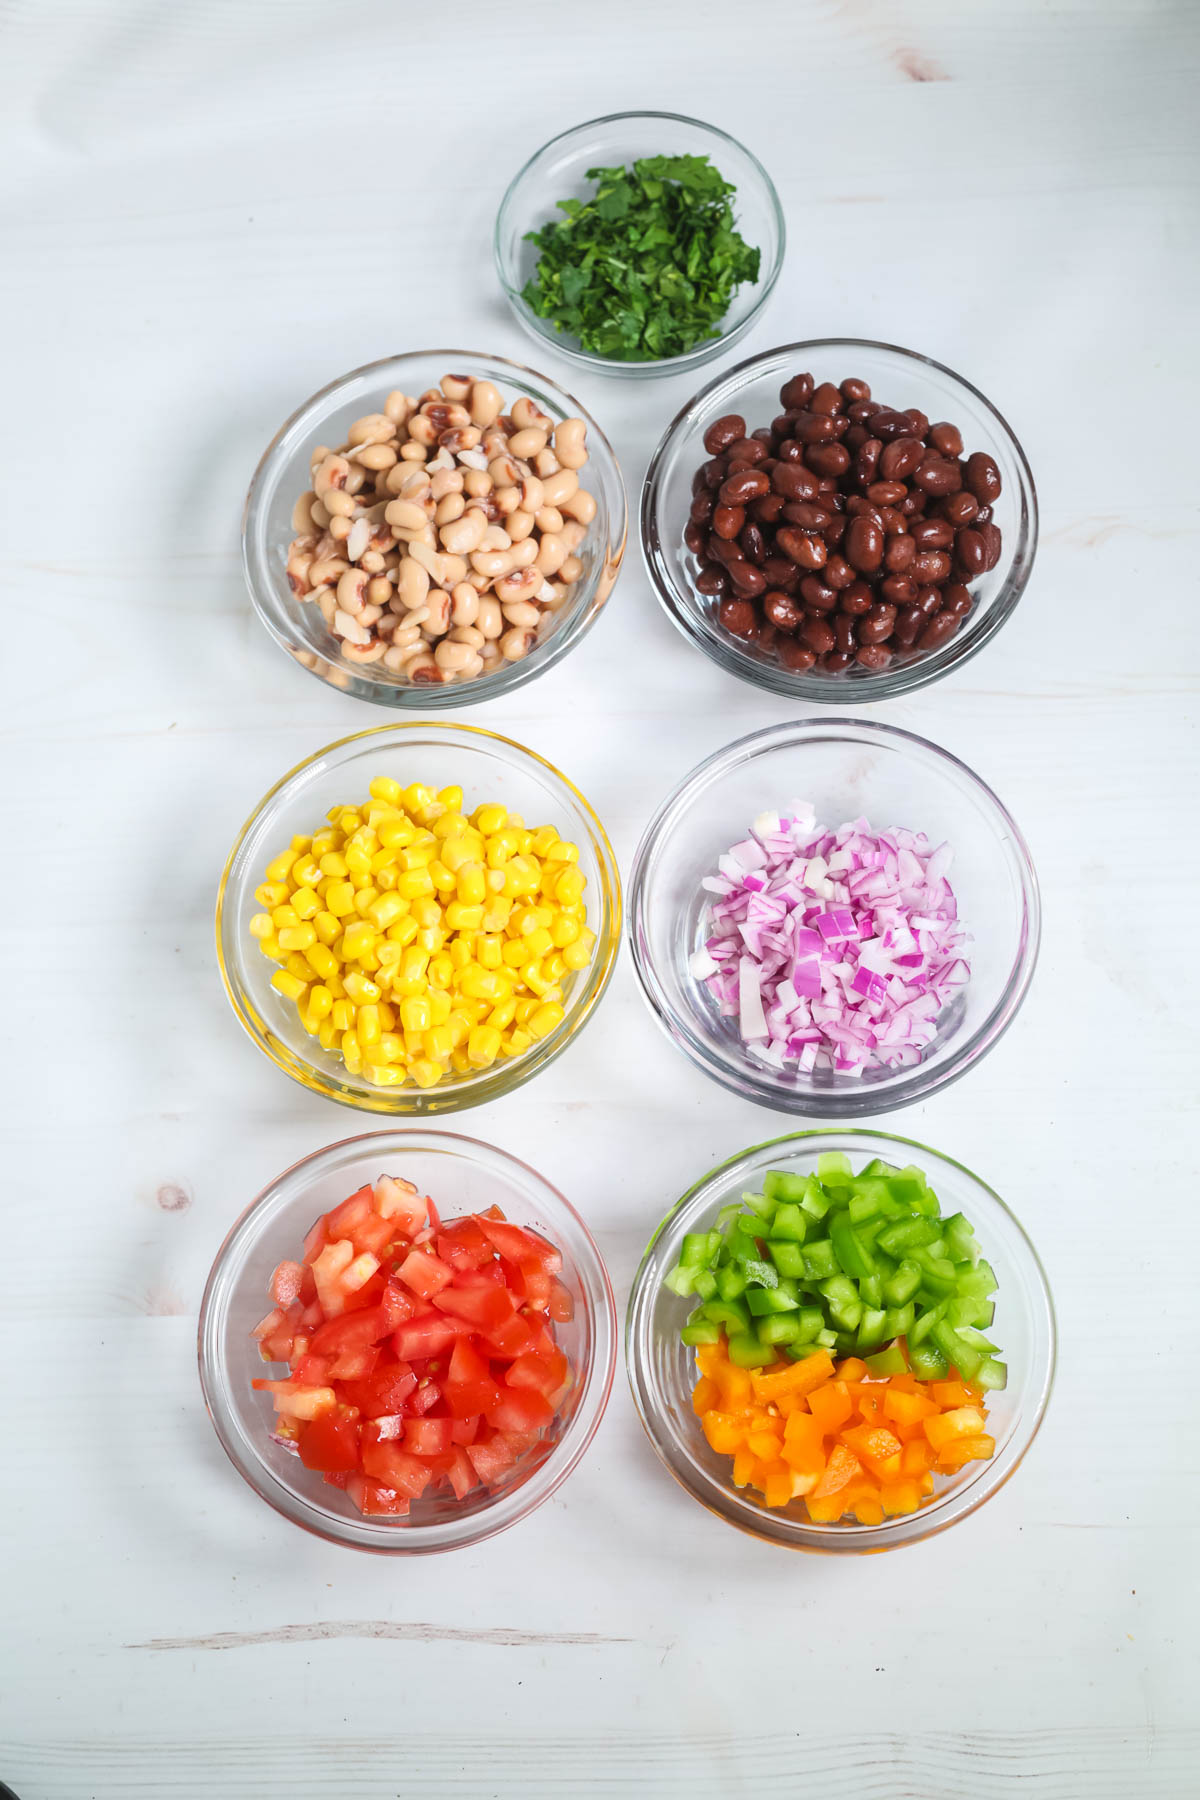 Chopped up vegetables in individual dishes for the ingredients.